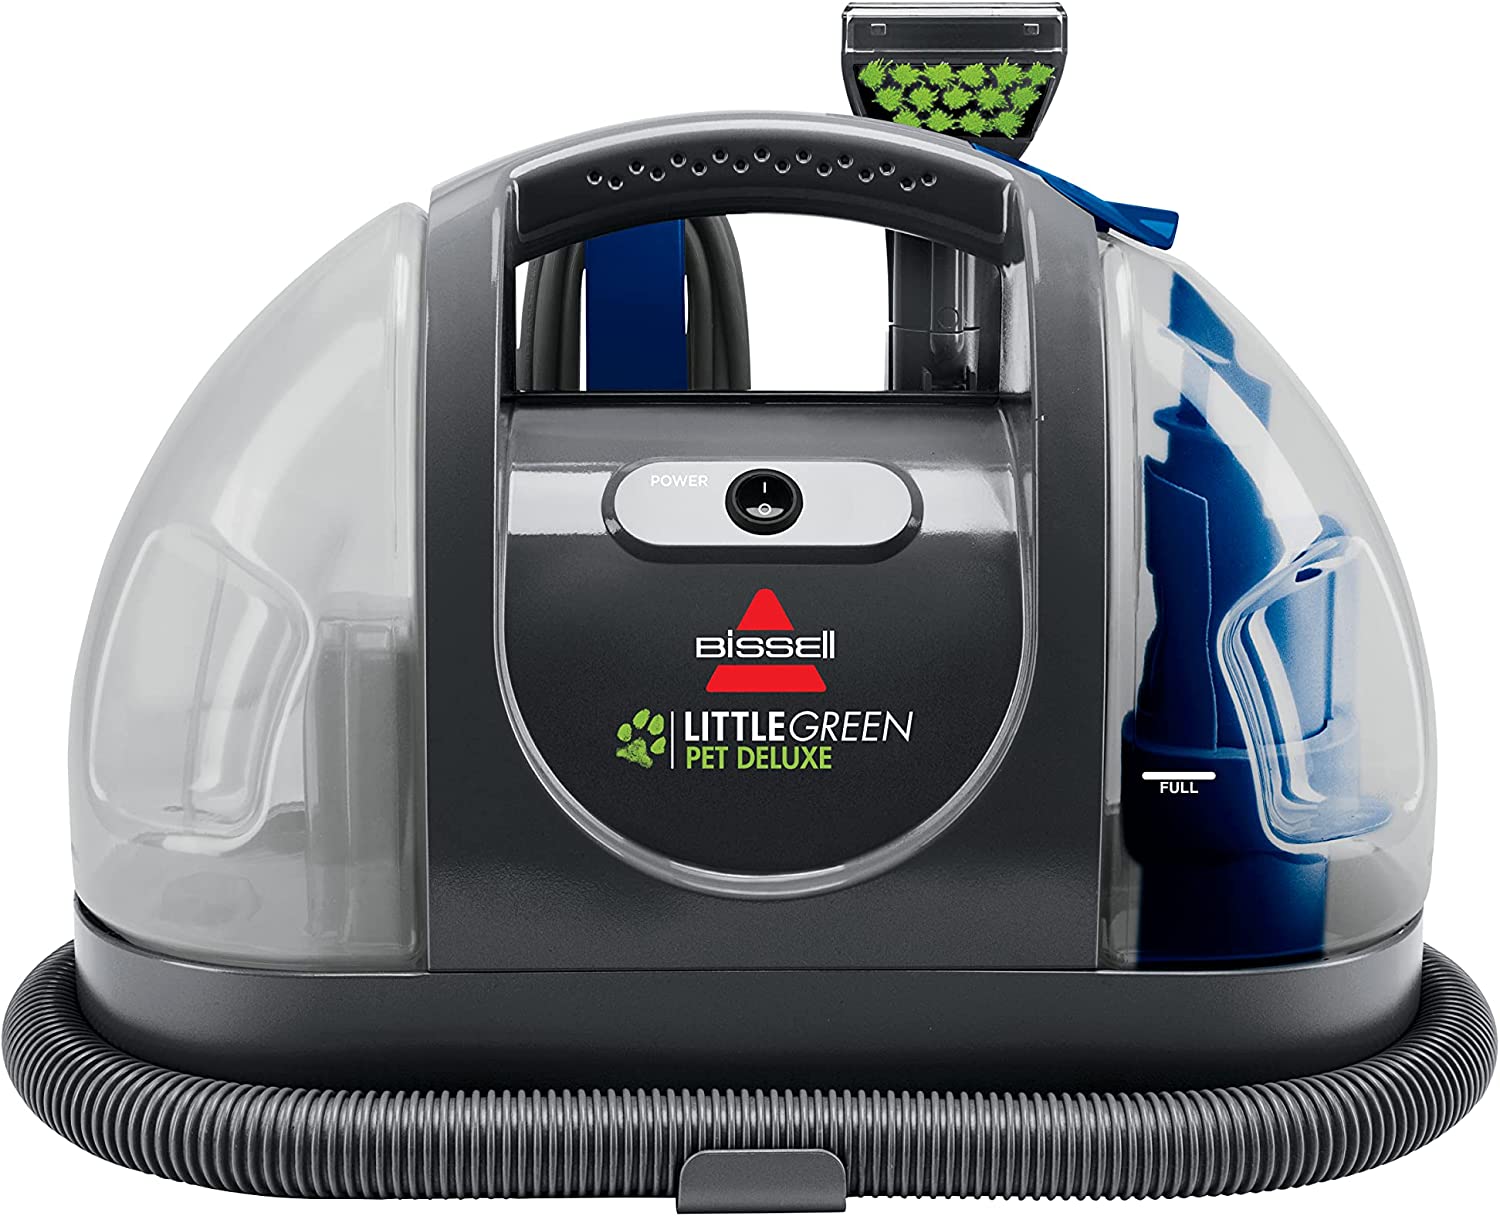 Bissell Little Green Pet Deluxe Portable Carpet Cleaner 3353 Gray/Blue